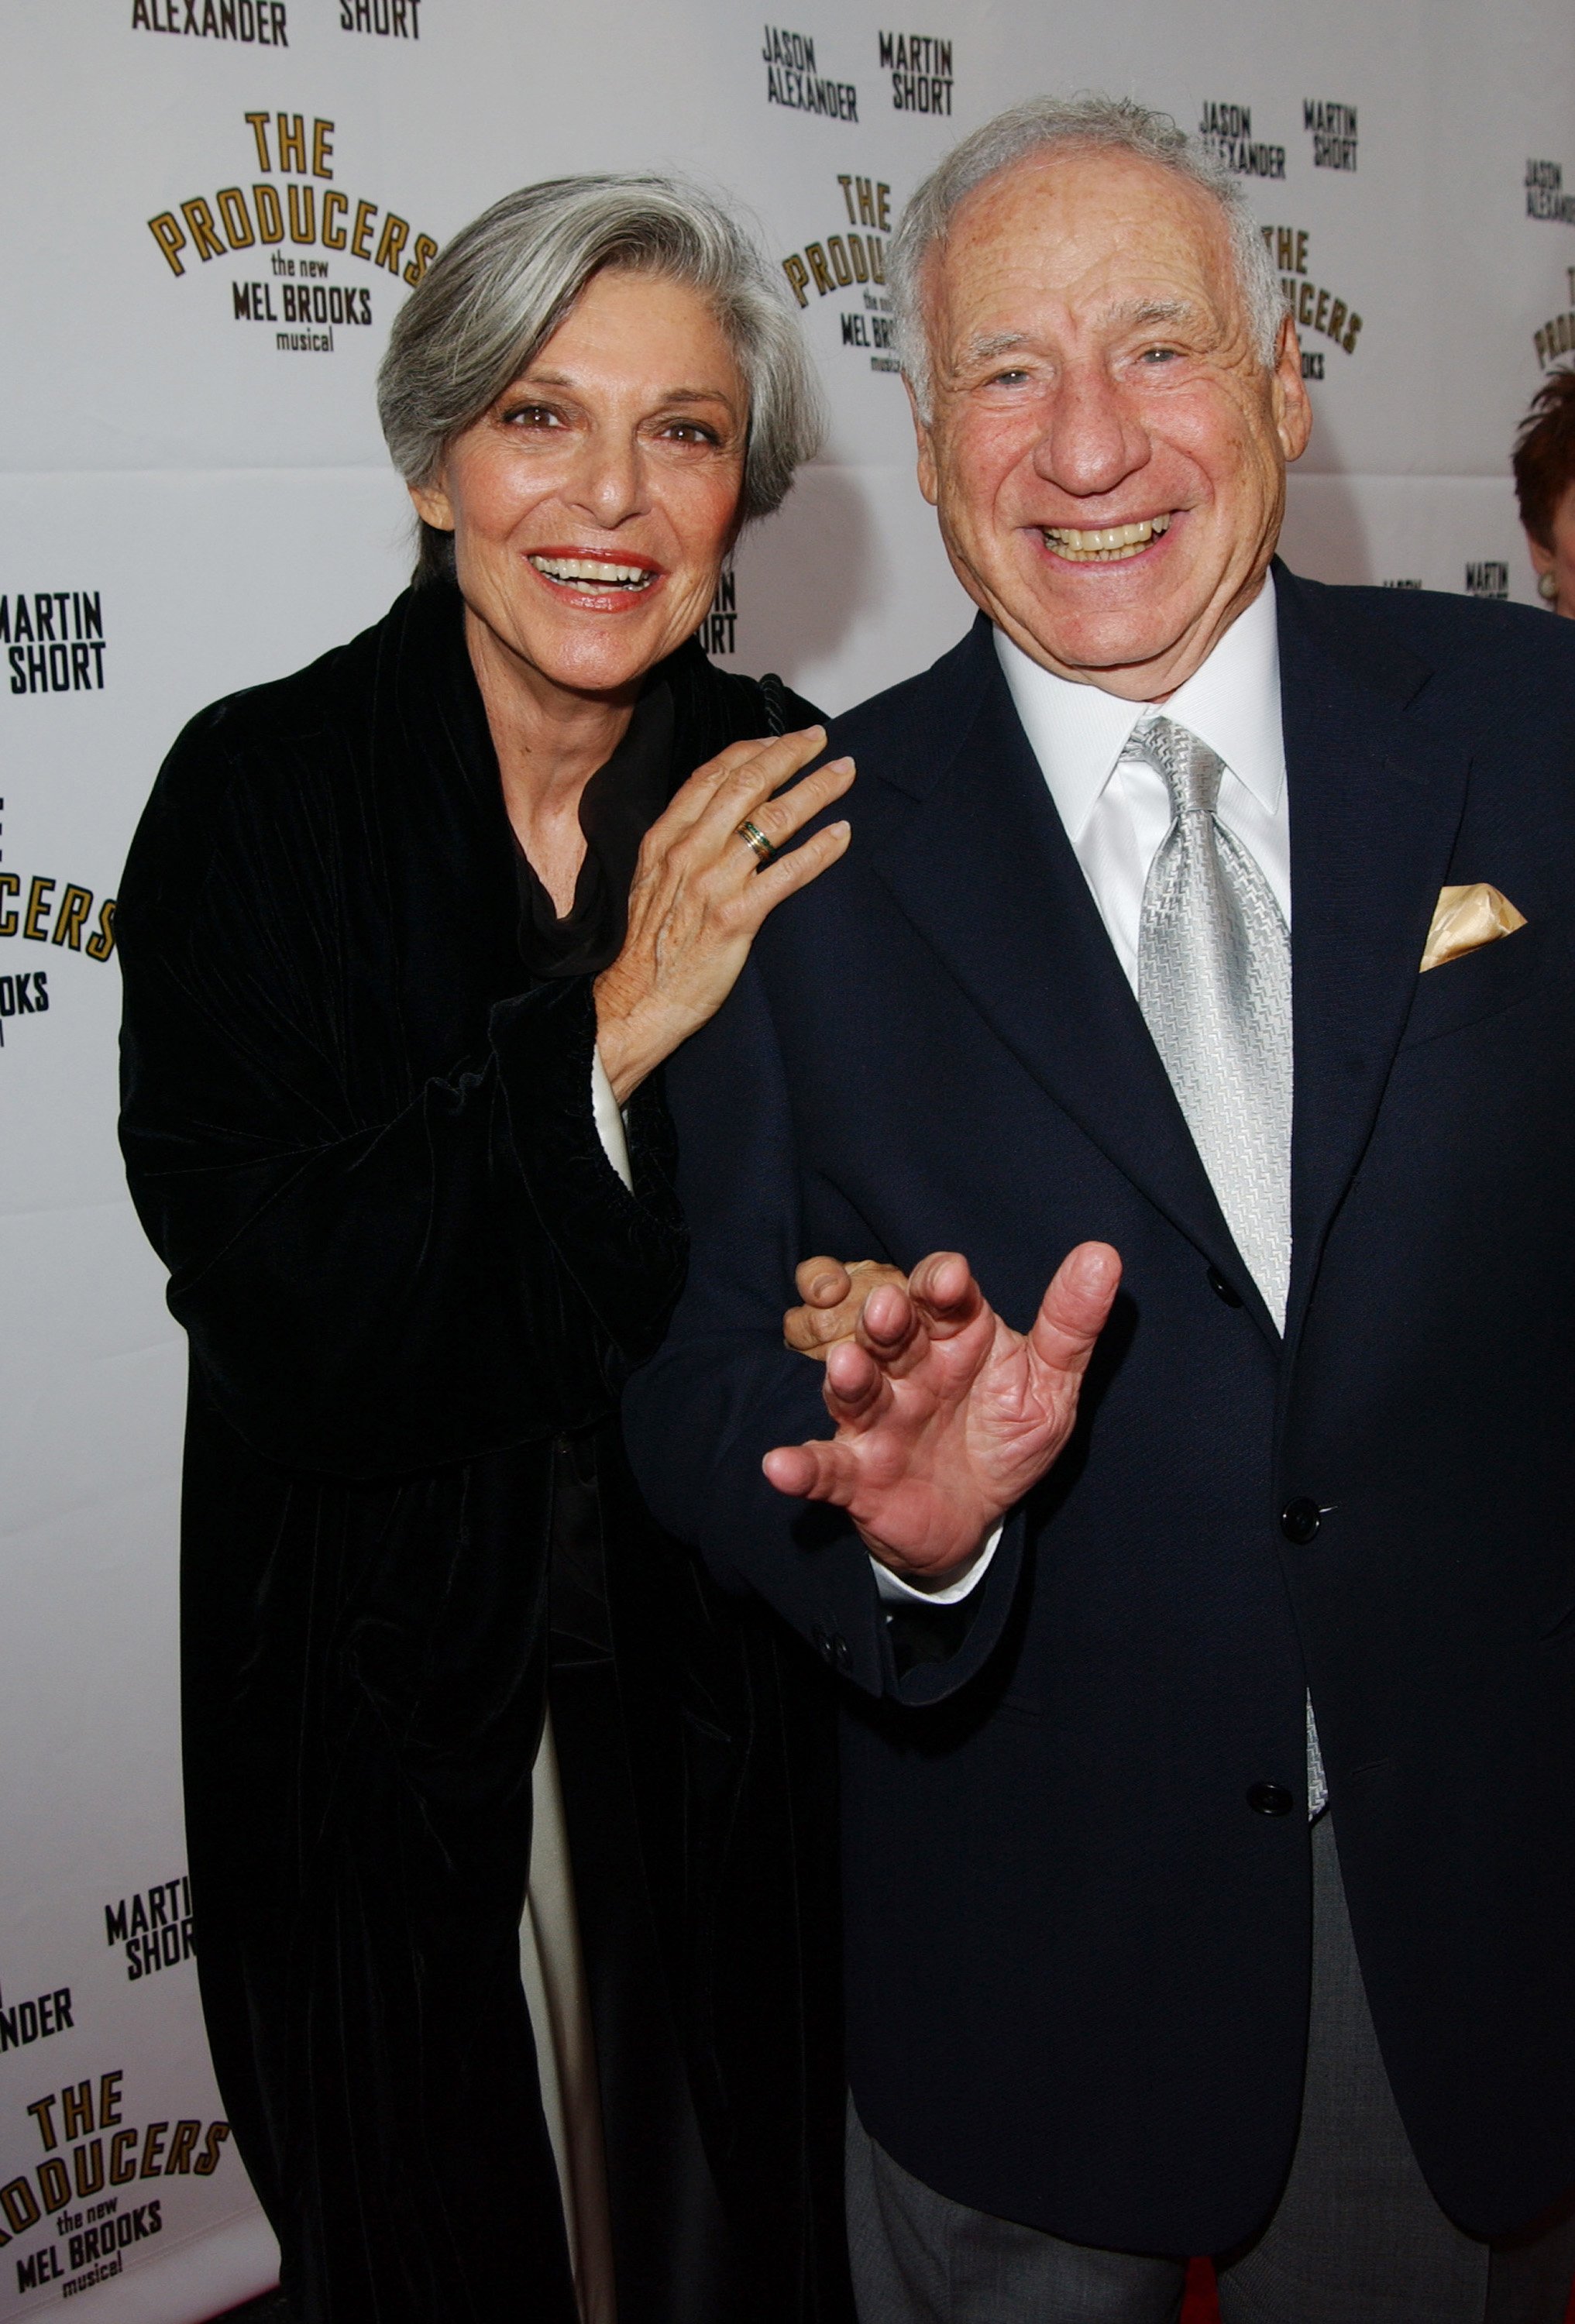 Anne Bancroft and Mel Brooks during Opening Night of "The Producers" at Pantages Theatre in Hollywood, California, United States in 2003. | Source: Getty Images